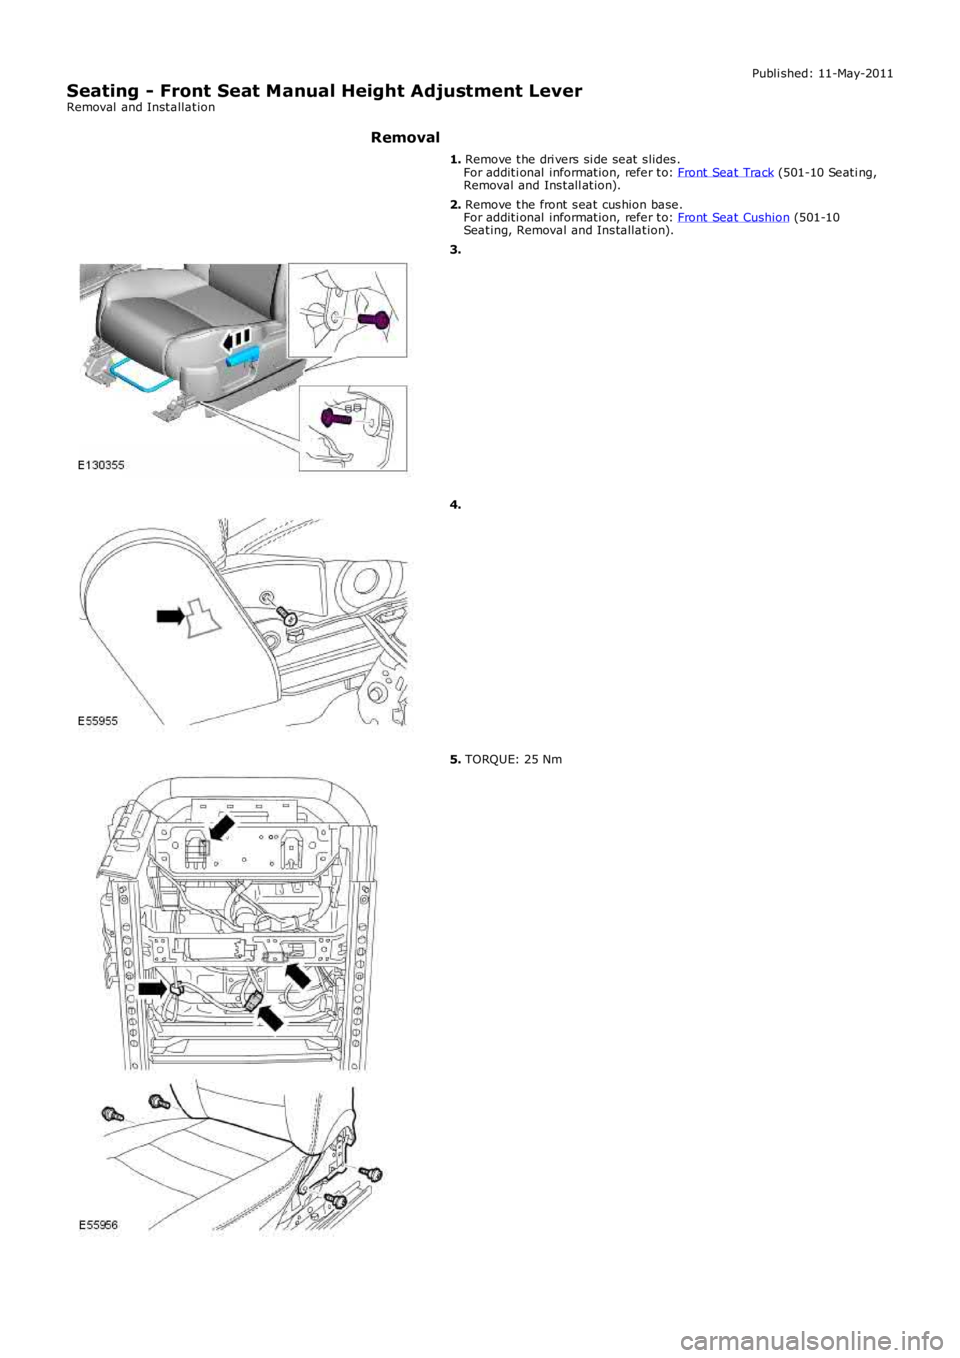 LAND ROVER FRELANDER 2 2006  Repair Manual Publi shed: 11-May-2011
Seating - Front Seat Manual Height Adjustment LeverRemoval  and Installation
Removal
1. Remove the dri vers si de seat slides.For additi onal information, refer to: Front Seat 